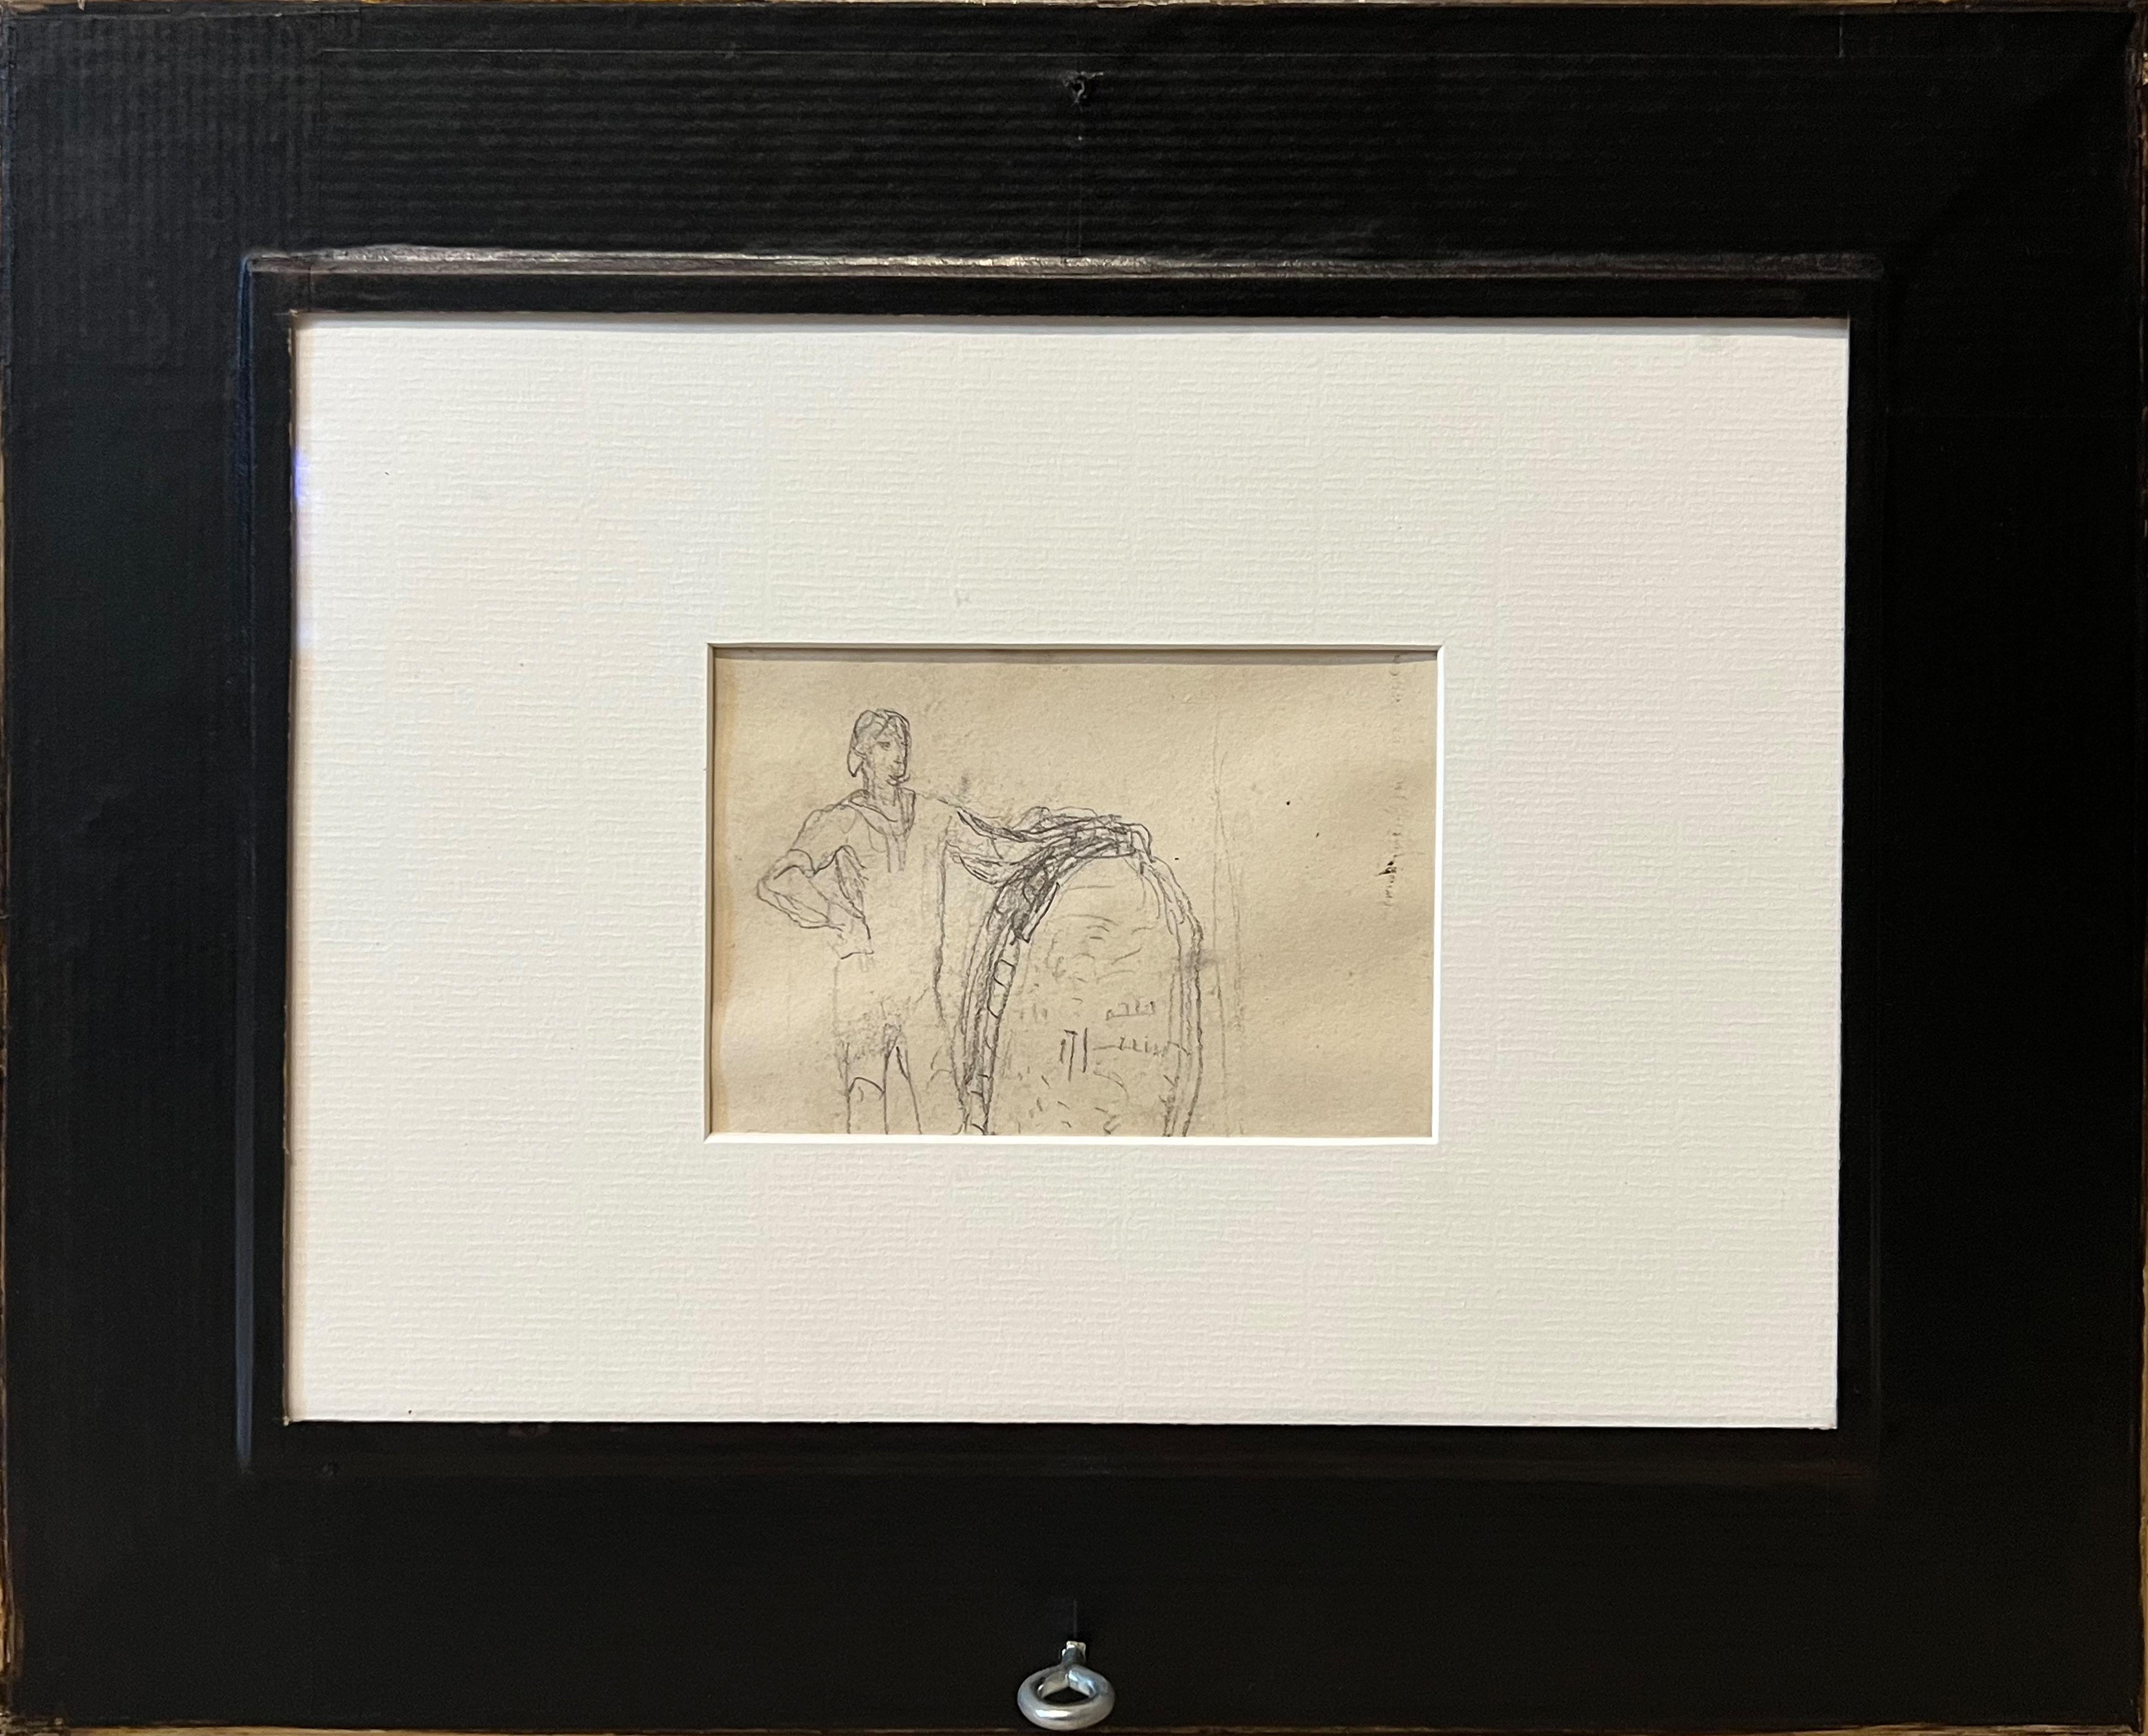 Black pencil drawing, stamped from the widow’s sale in 1894 (Lugt L. 3728), dimensions 7x10.2cm. It is most likely the first thought for this subject, circa 1846. 

On the reverse side, there is a drawing of a standing peasant beside his winnowing